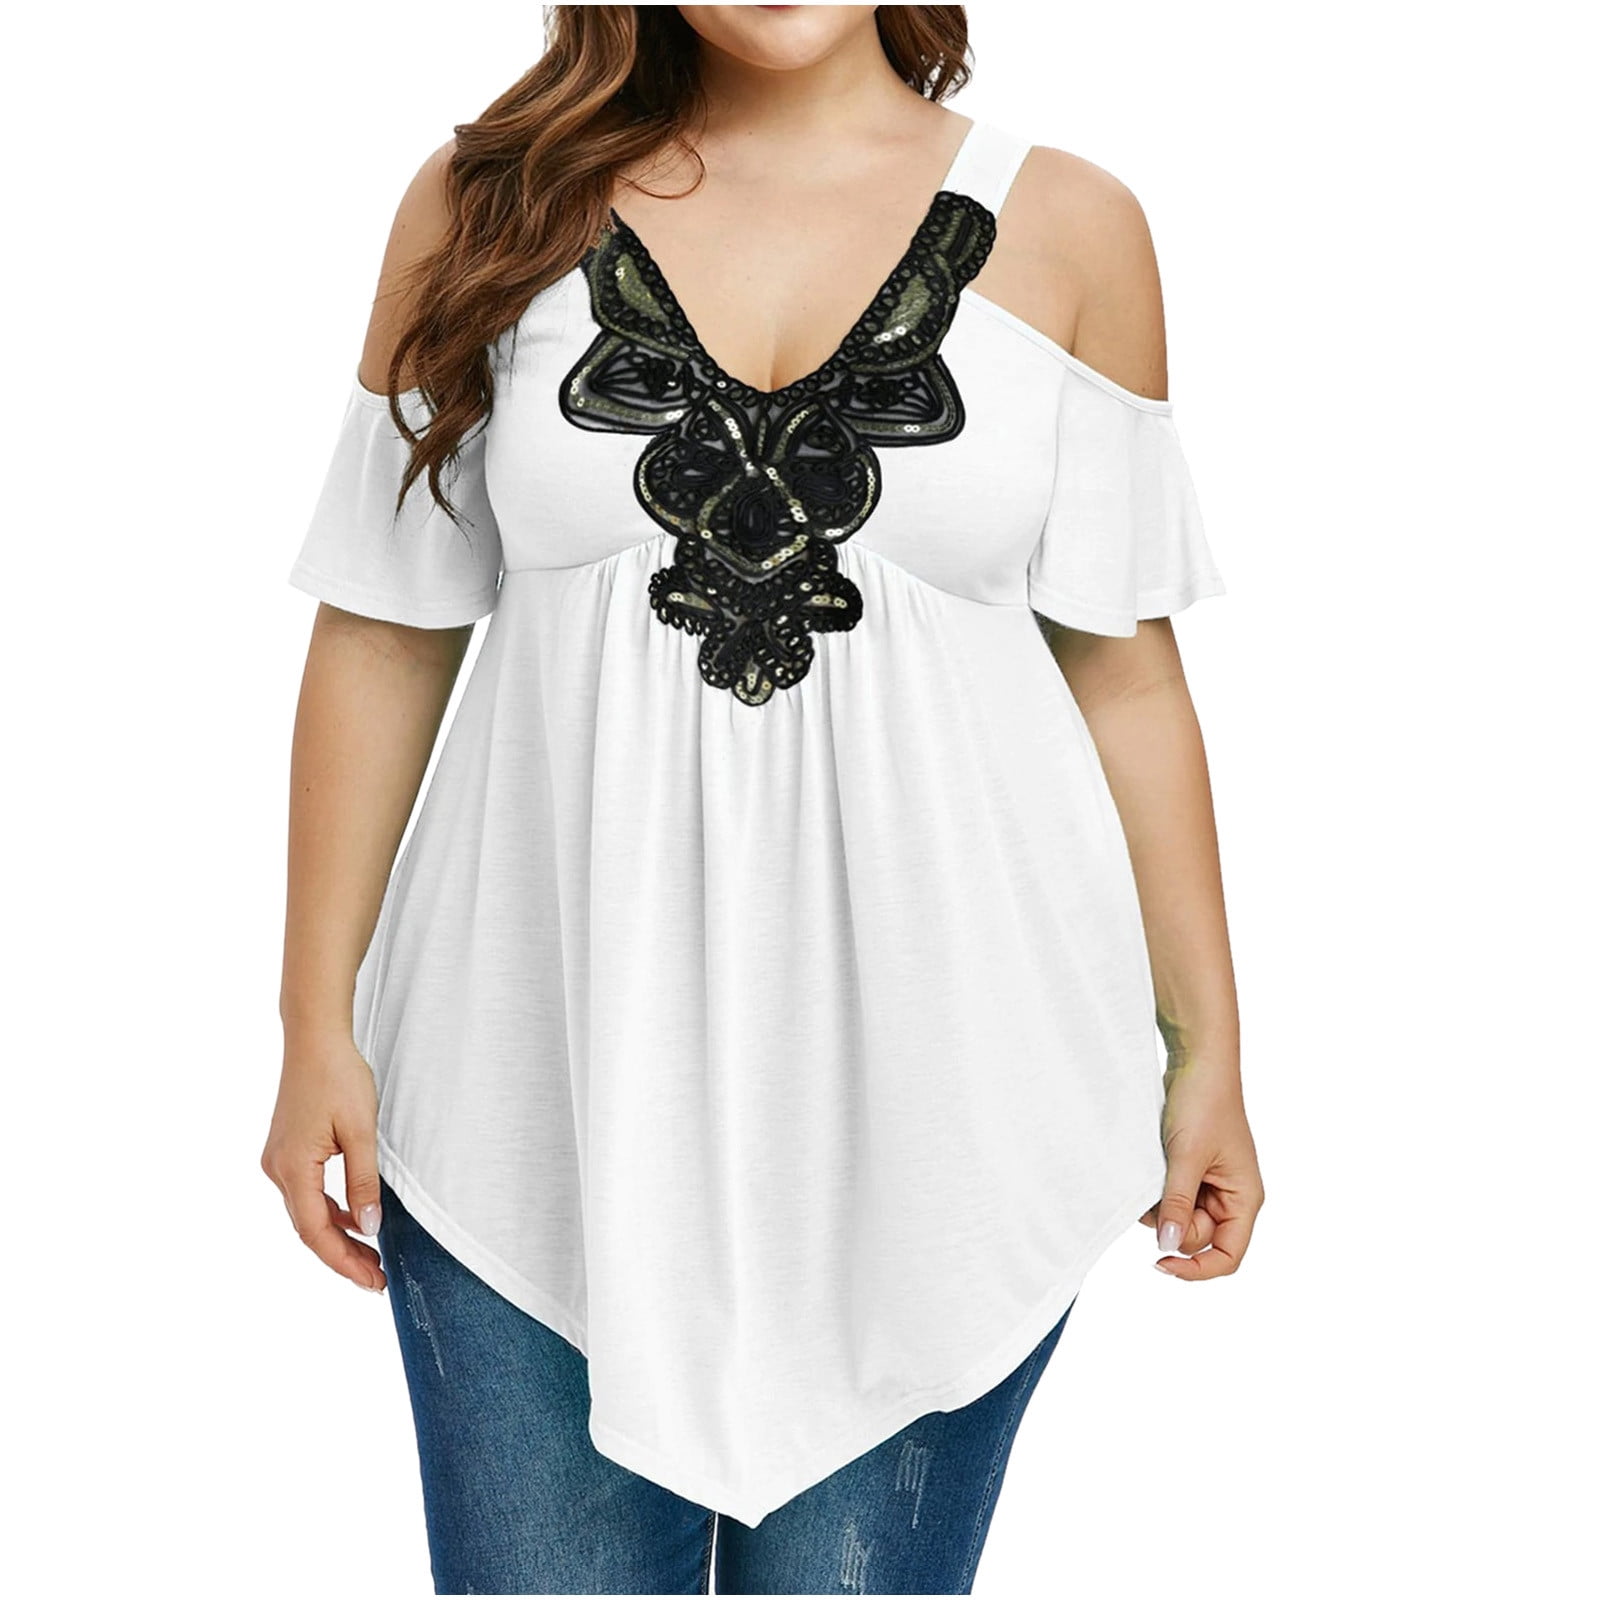 UK Women Lace O-Neck Asymmetric Tops Blouse 3/4 Sleeve Shirts Pullover Plus Size